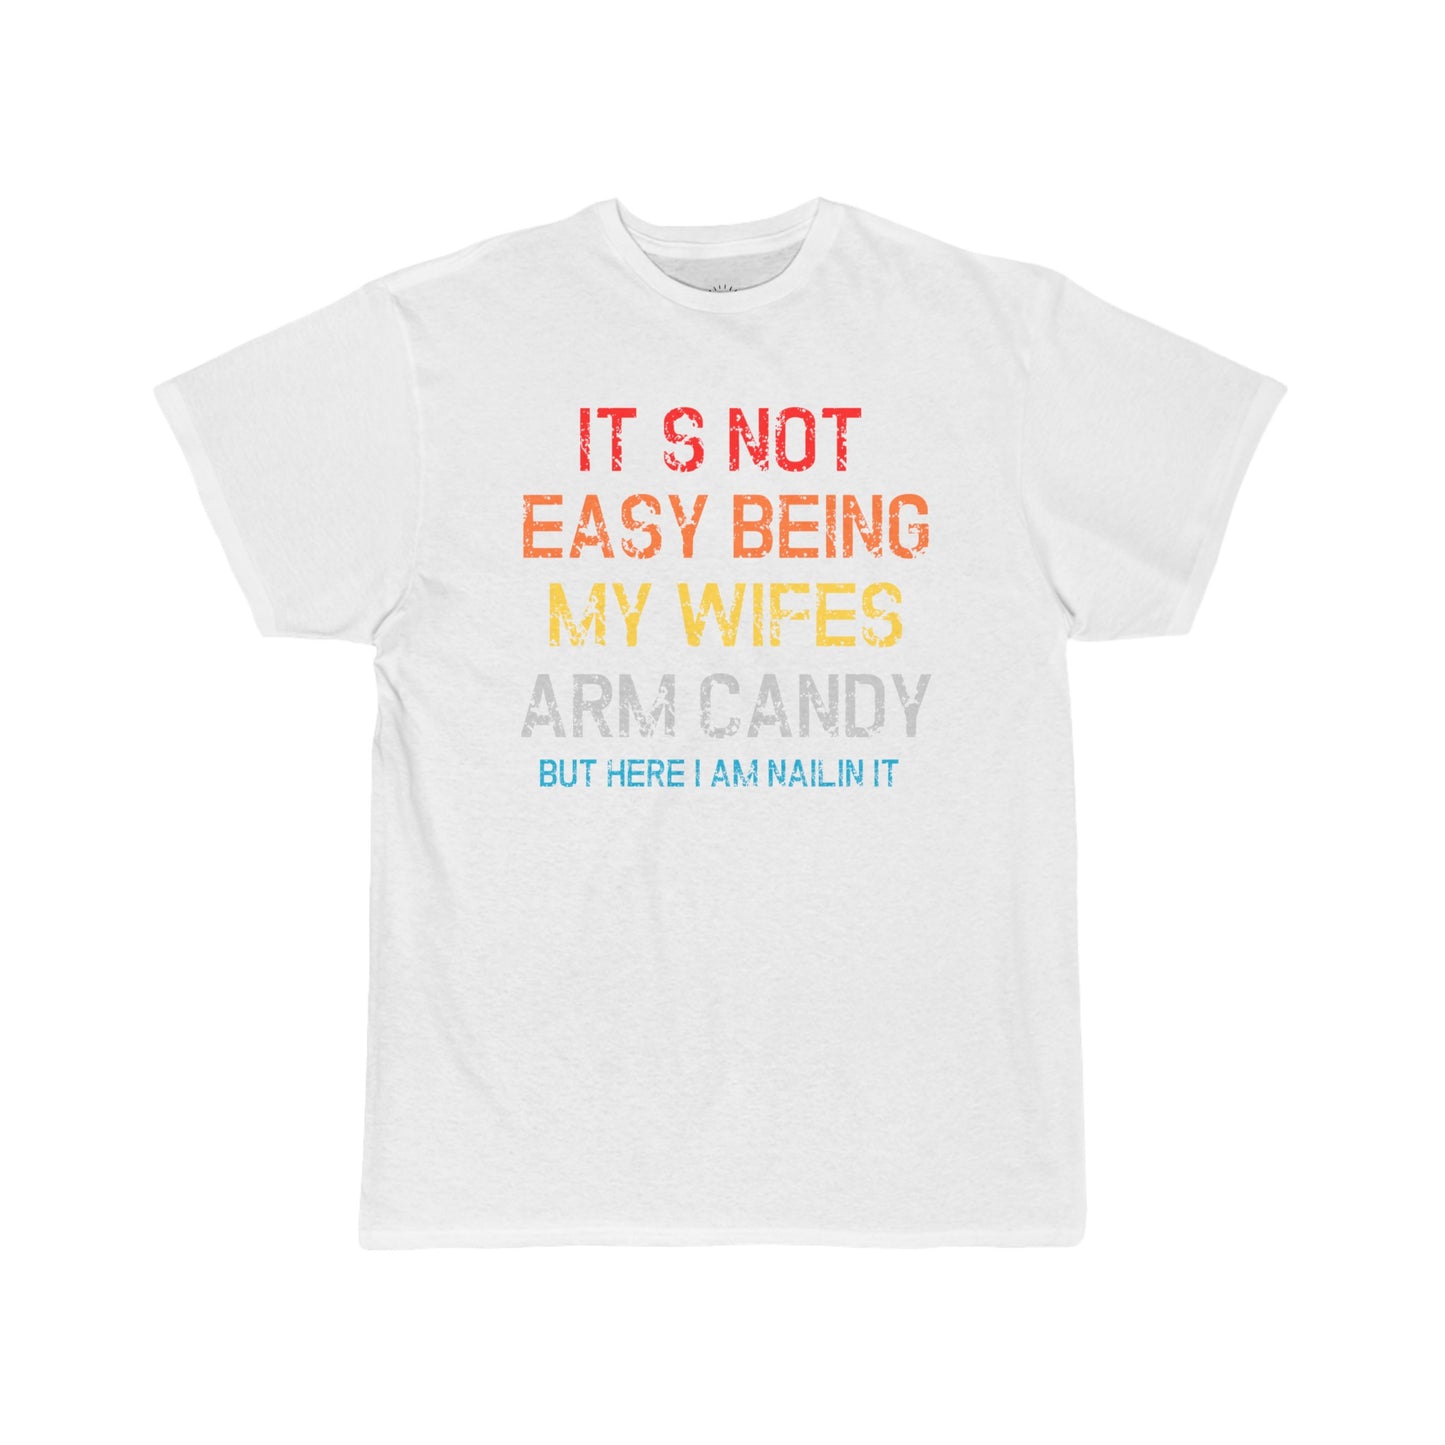 Wife's Arm Candy Men's Short Sleeve Tee - COLORFUL Text